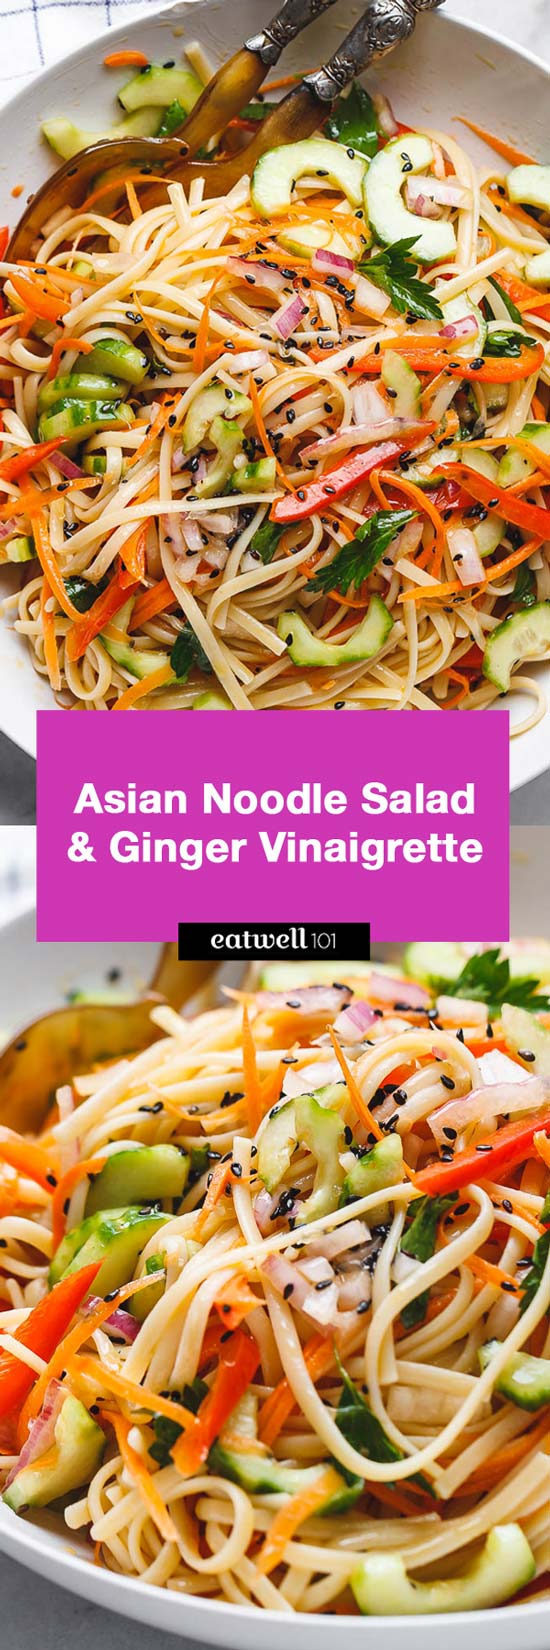 Asian Noodle Salad - #noodle #vegan #salad #recipe #eatwell101 - This vegan  noodle salad is perfect for midweek lunches or larger gatherings.